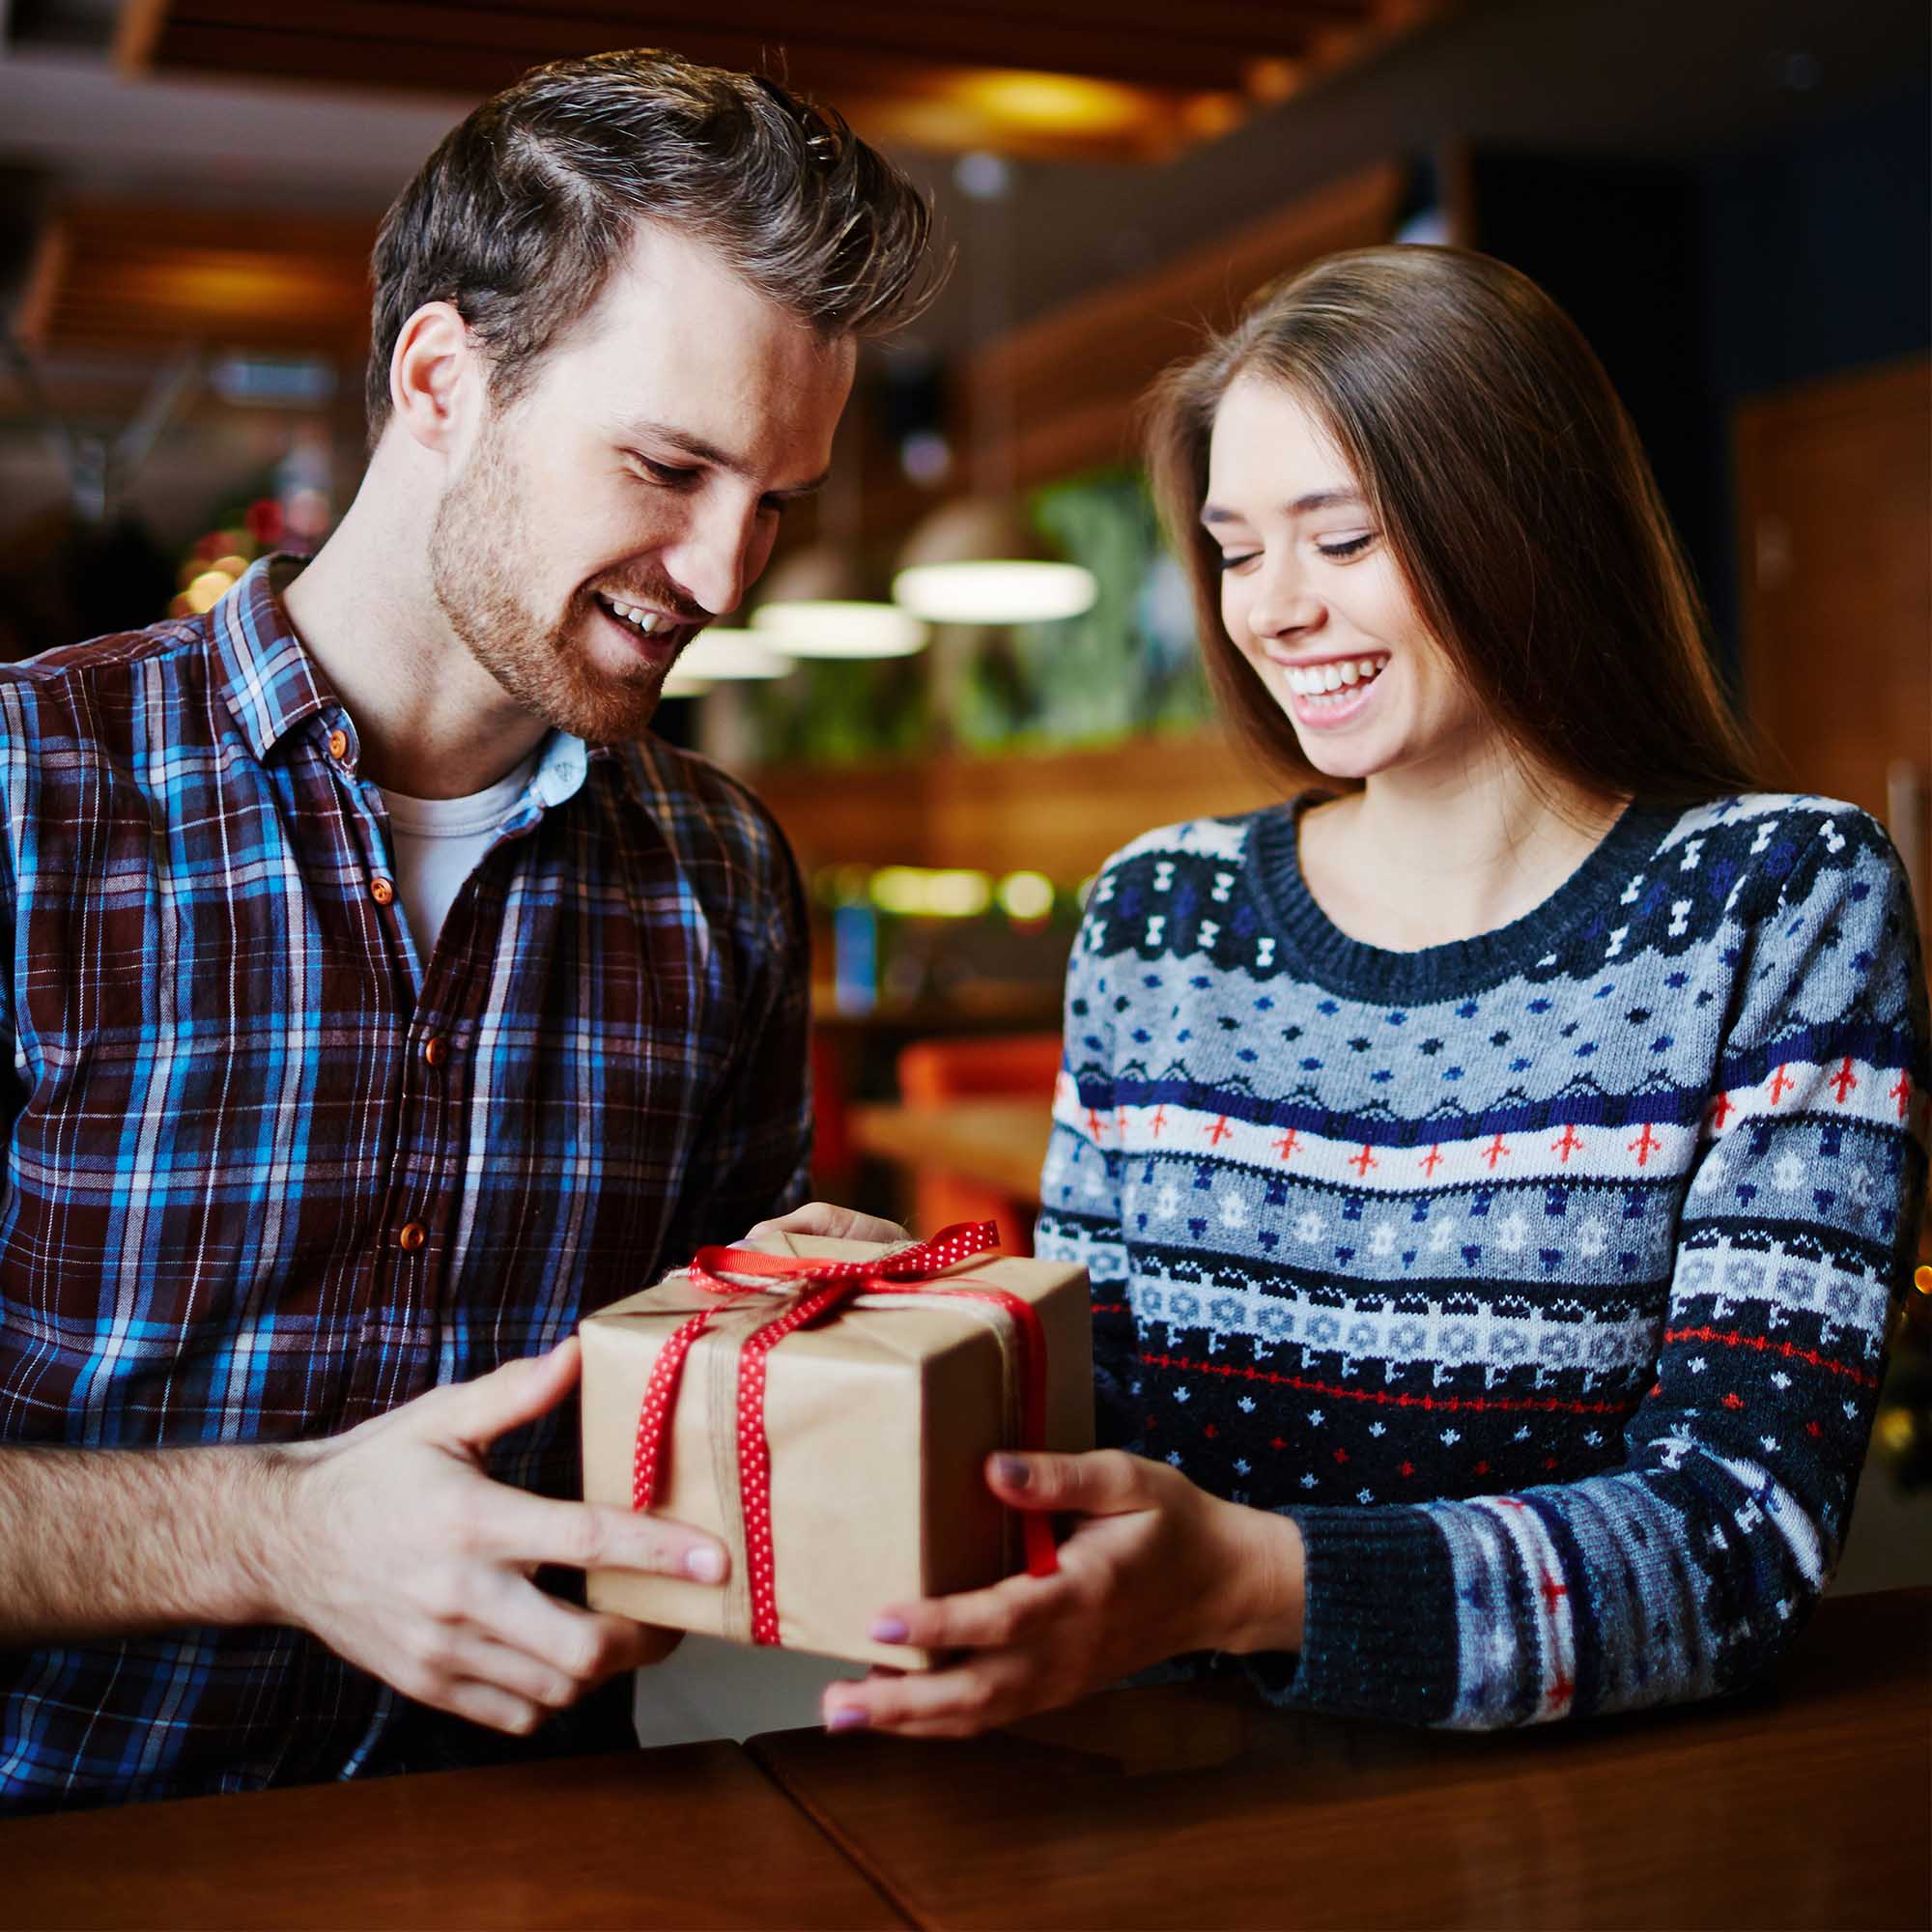 10 ways to find the perfect gift for your loved ones